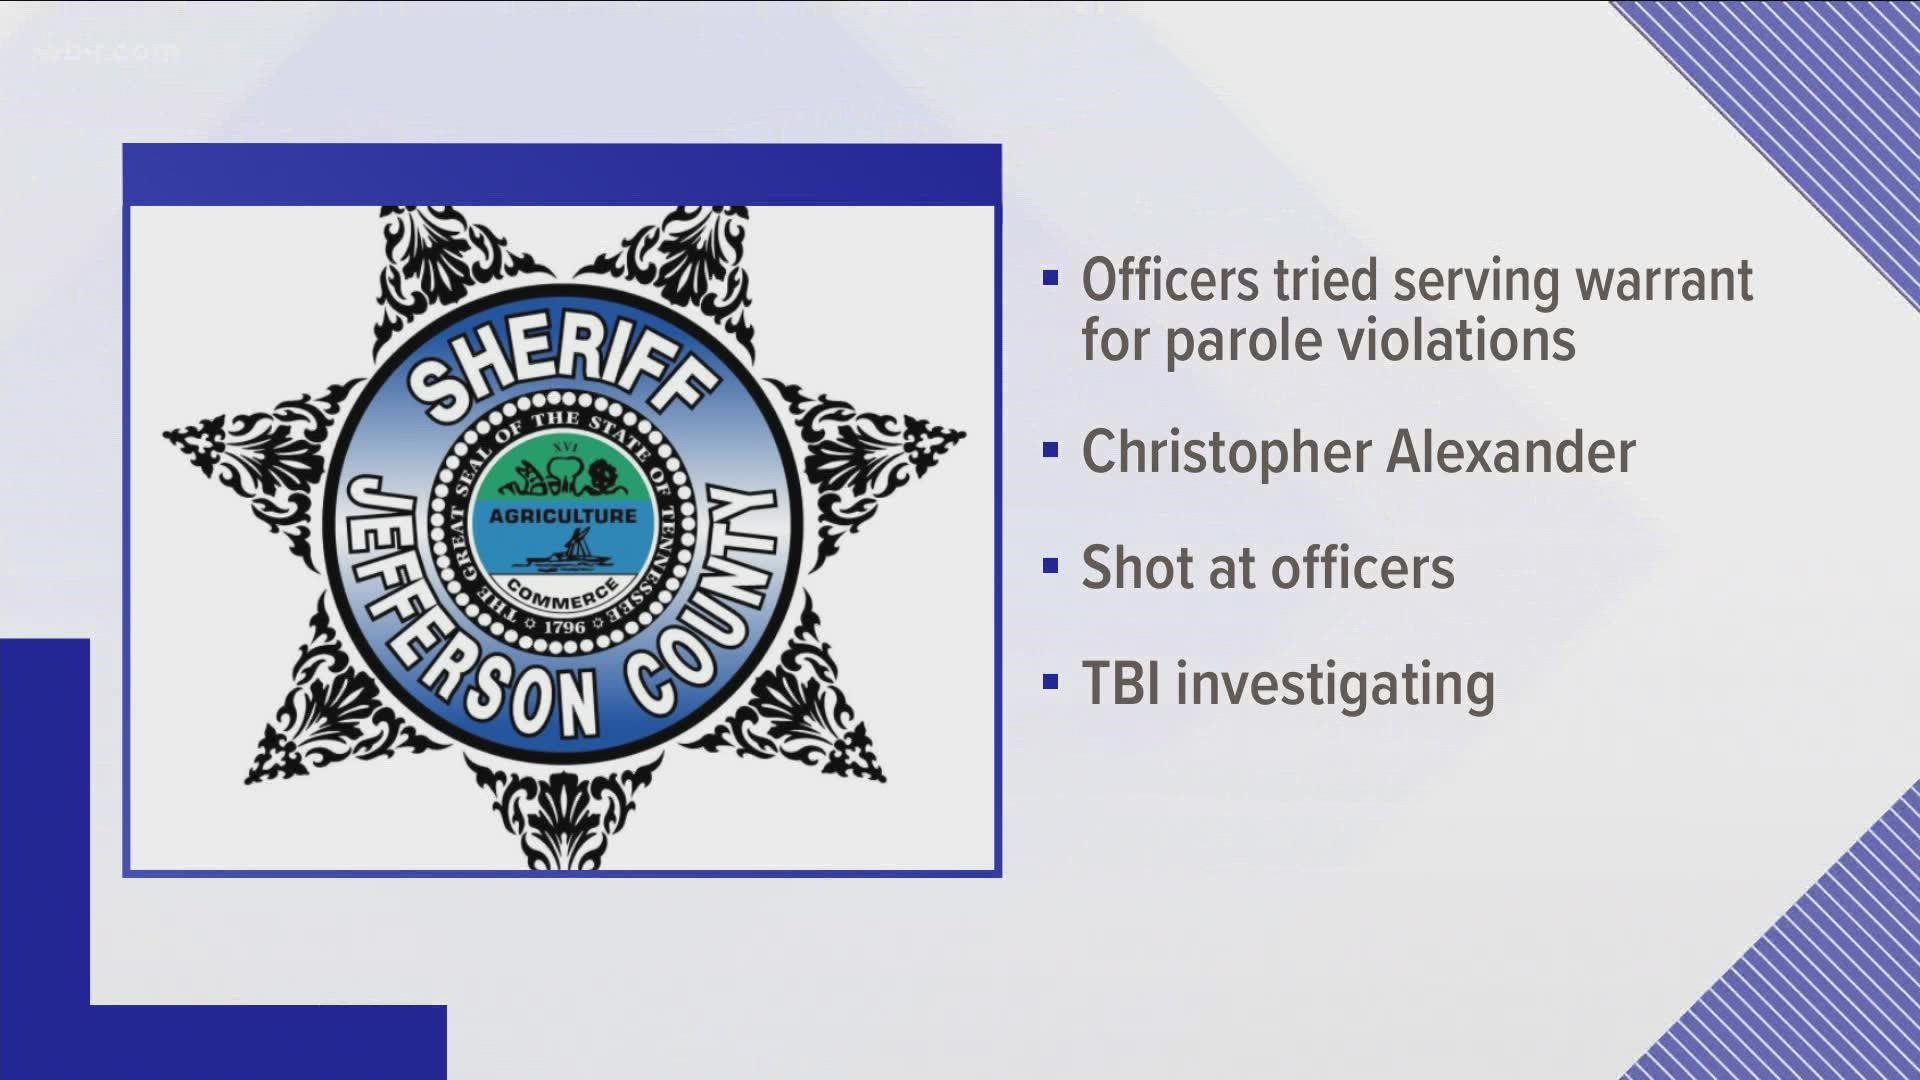 The Jefferson County Sheriff's Office said a man fired shots on them when they arrived at a camper-trailer to serve warrants for parole violations.